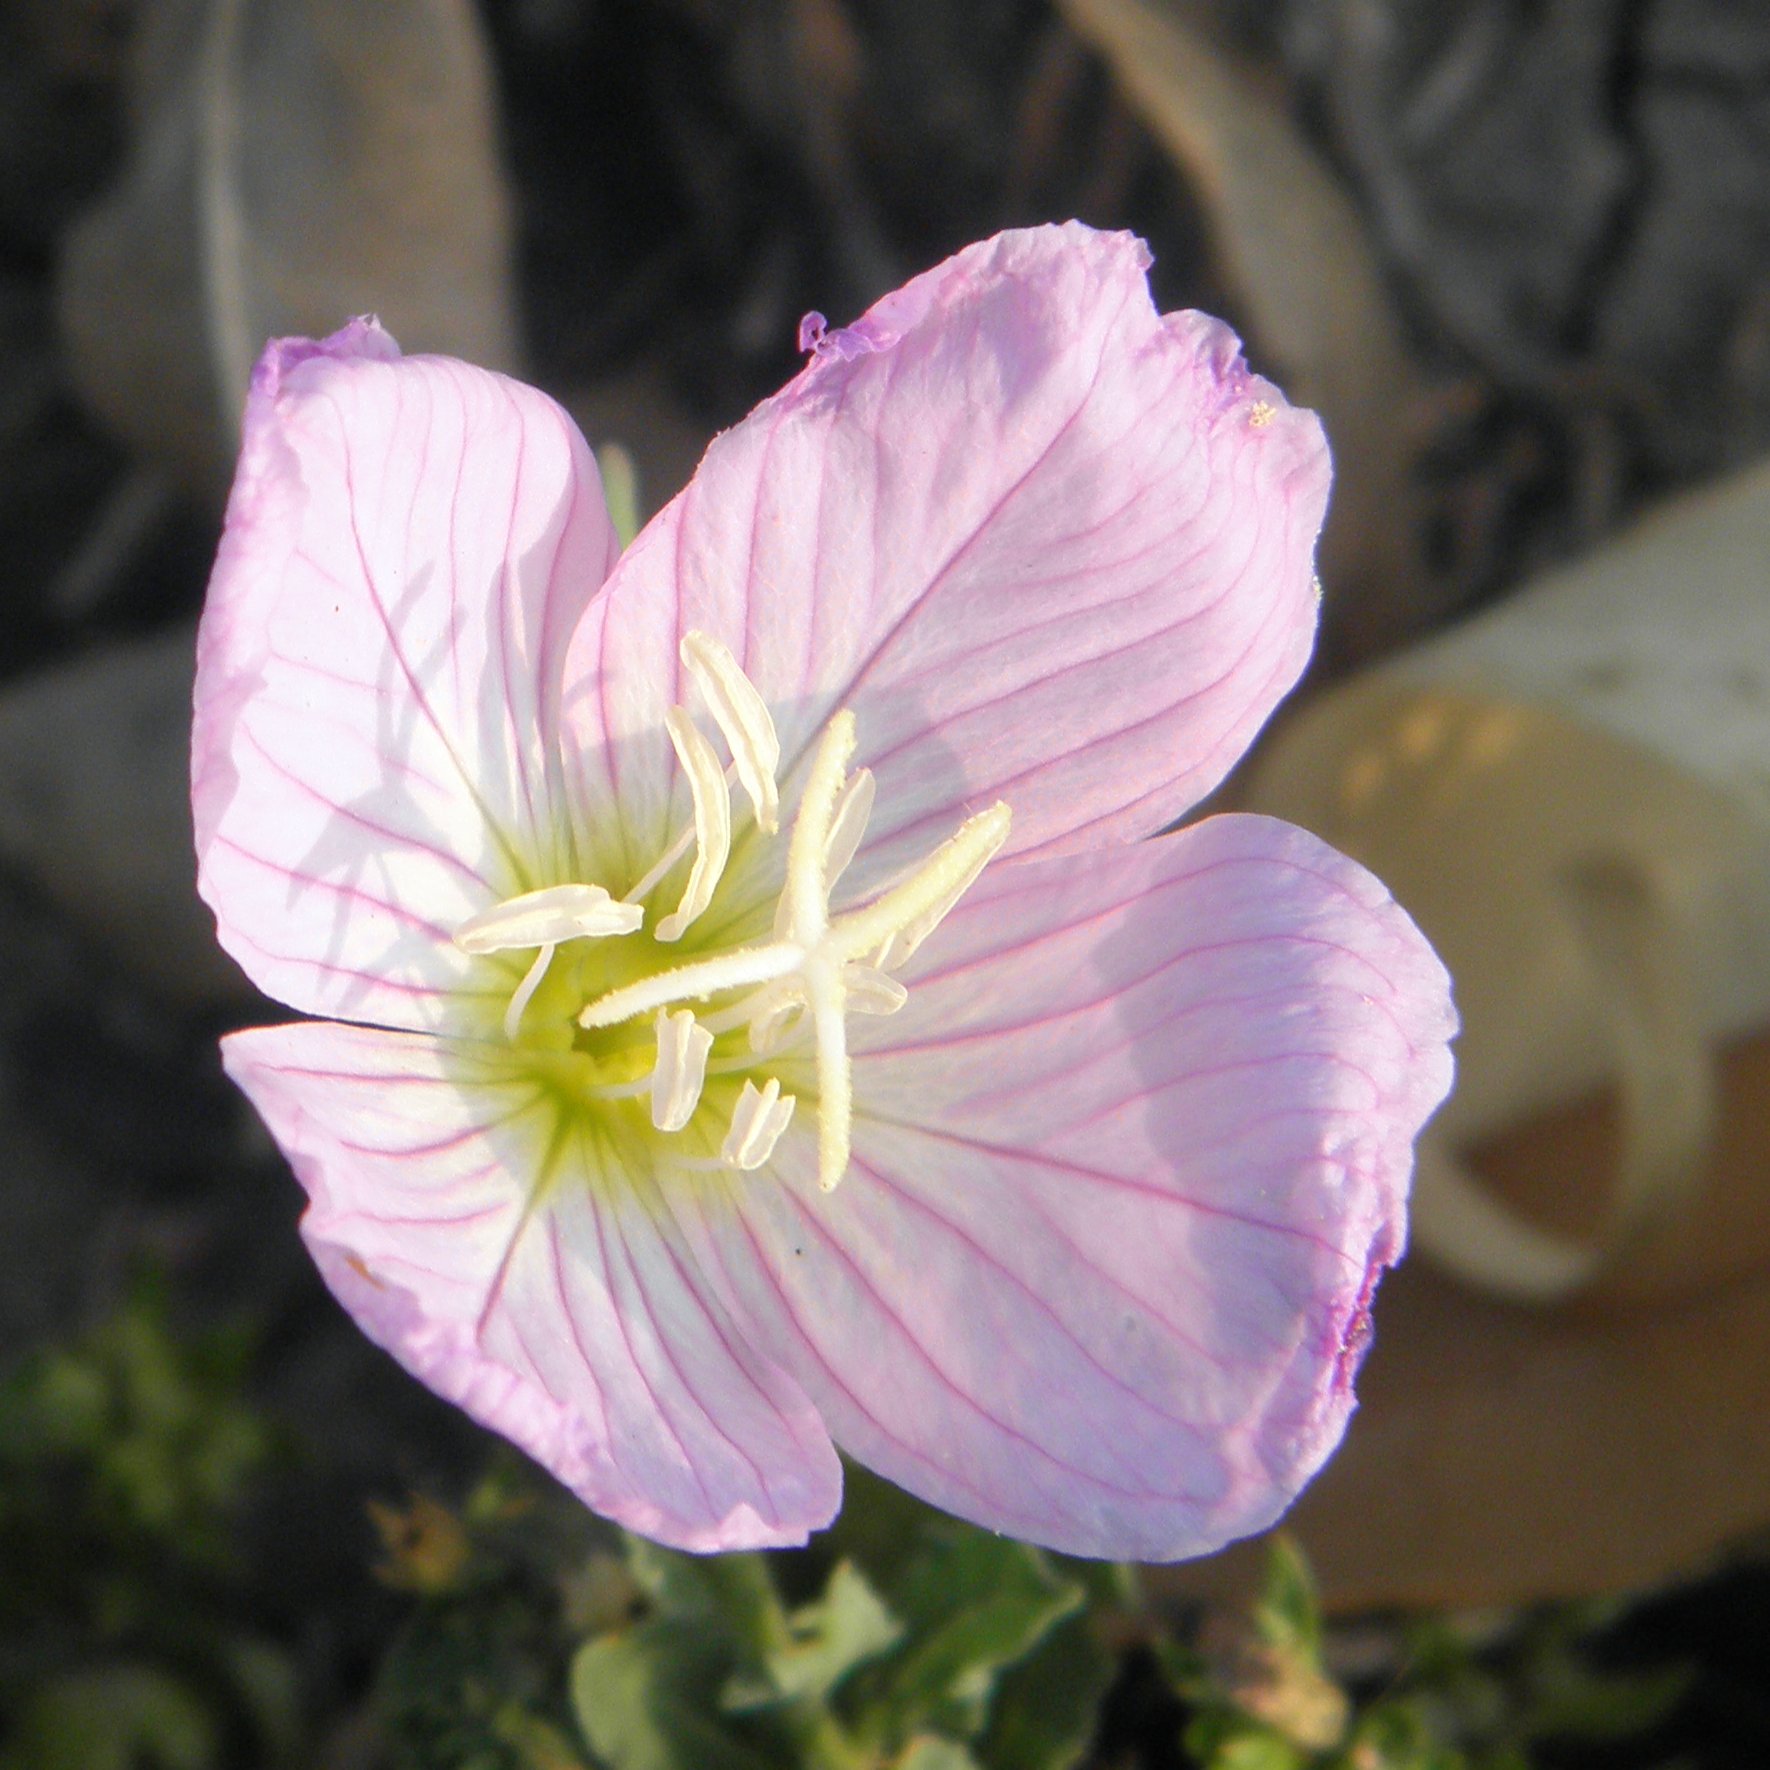 there is a close up view of a pink flower